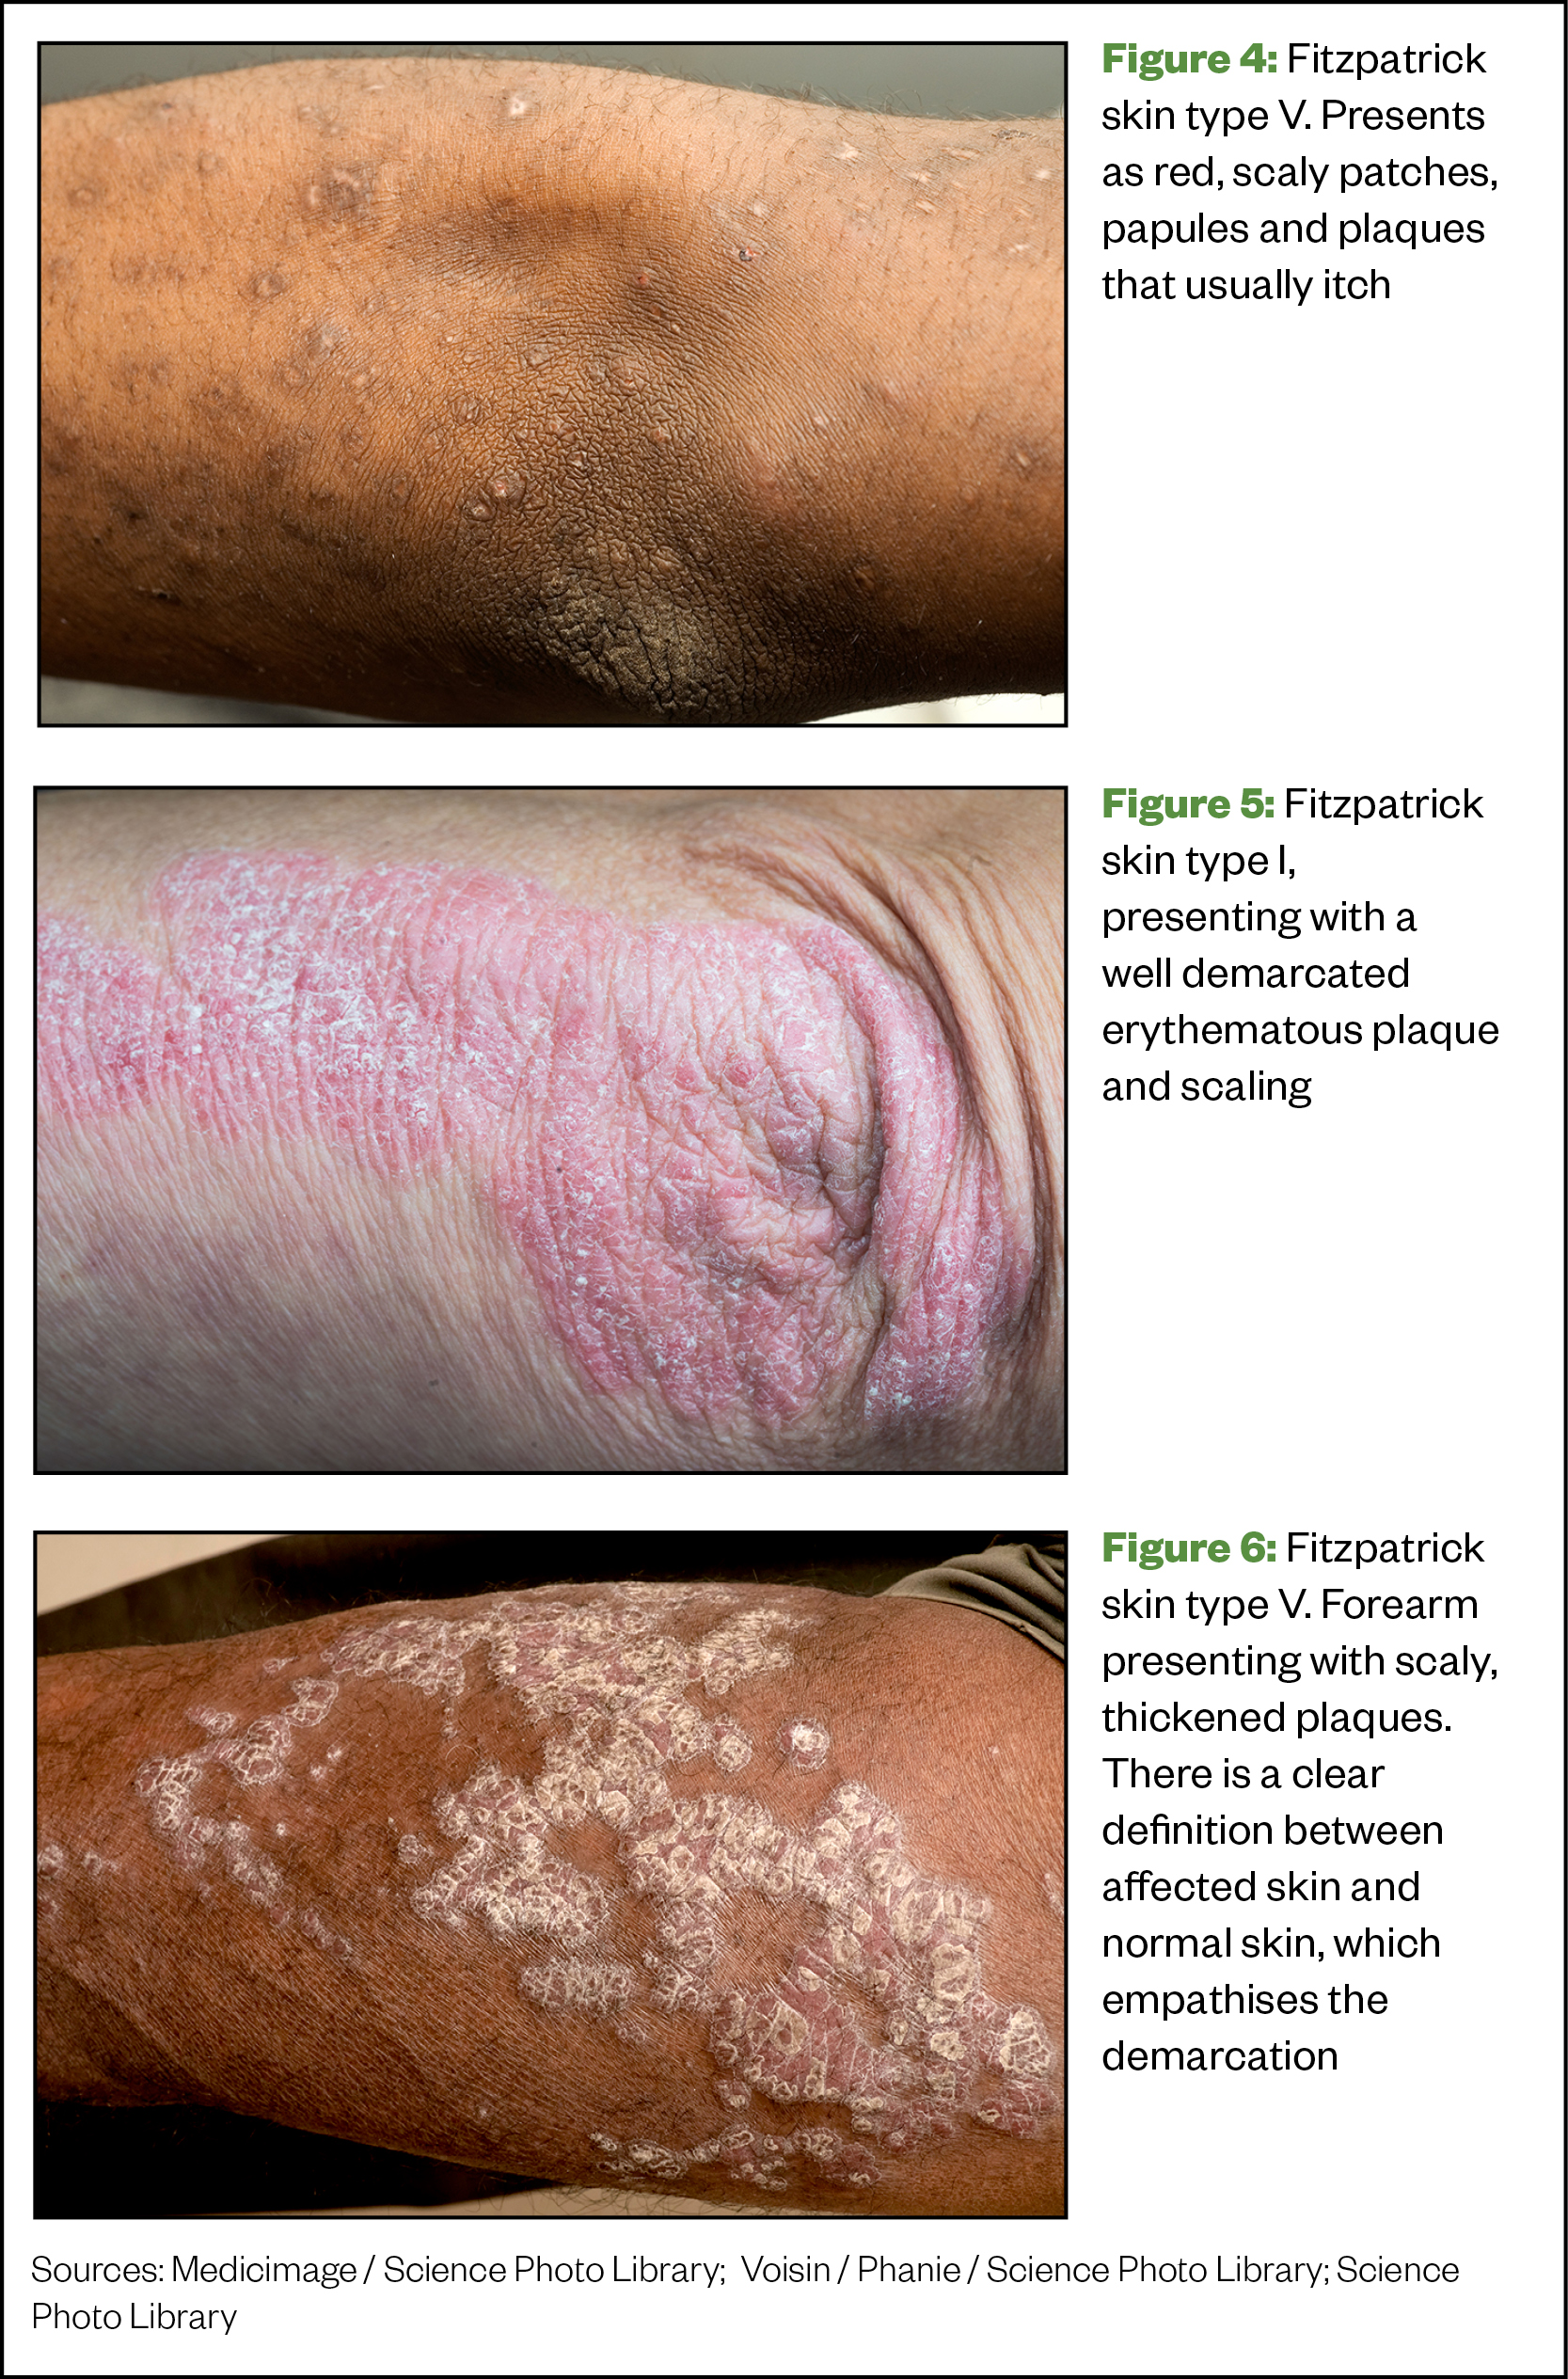 Figure 4: Scaly patches, papules and plaques that usually itch. Figure 5: well demarcated erythematous plaque and scaling. Figure 6:  Forearm presenting with scaly, thickened plaques. 